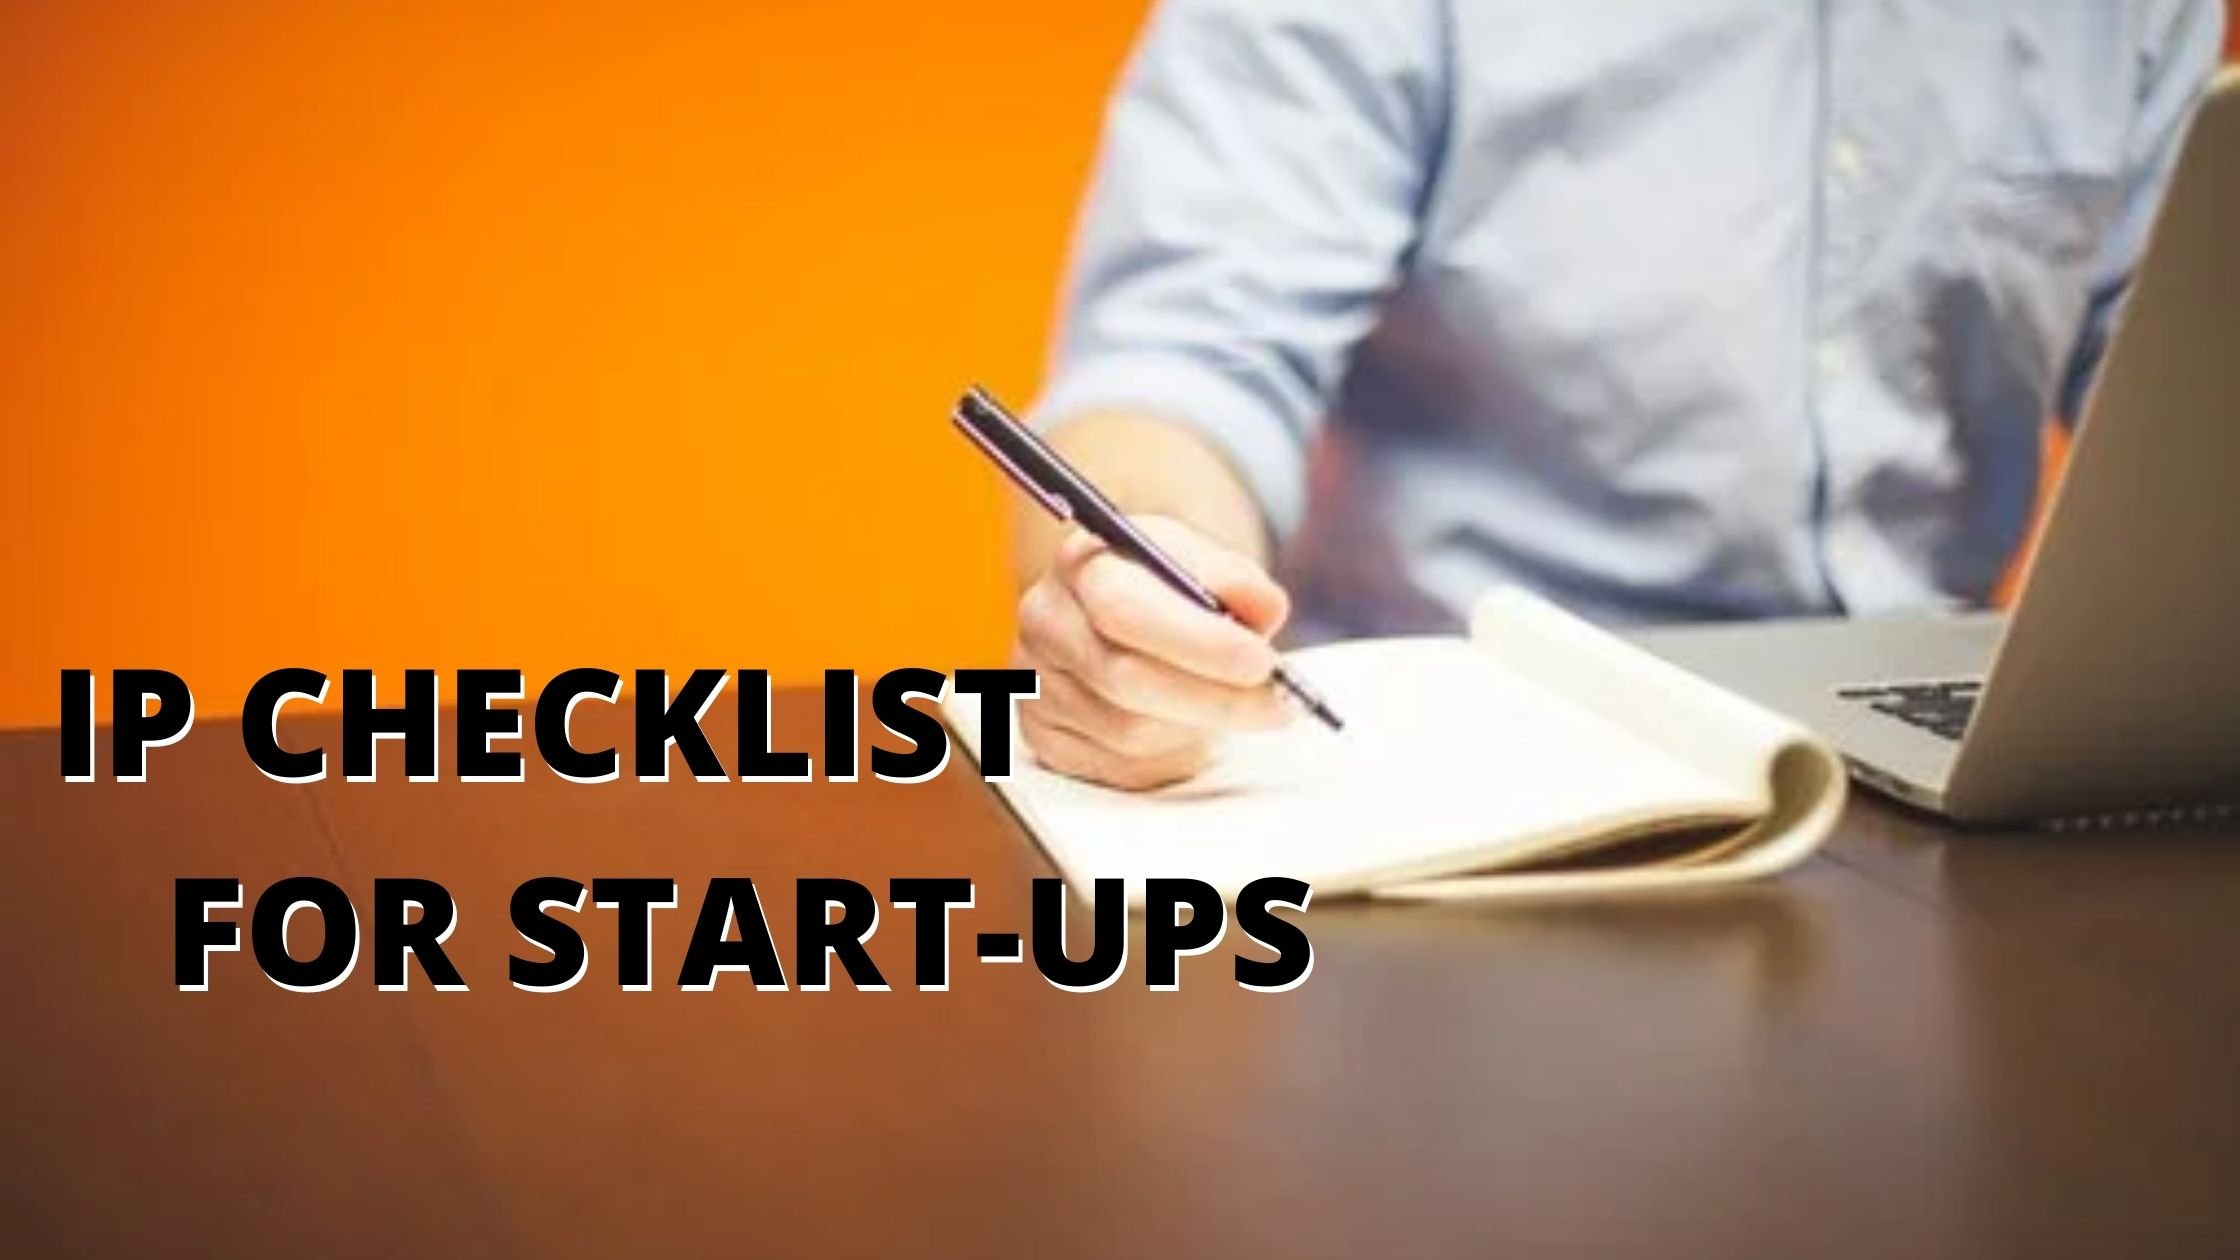 Intellectual Property Checklist for Start-ups